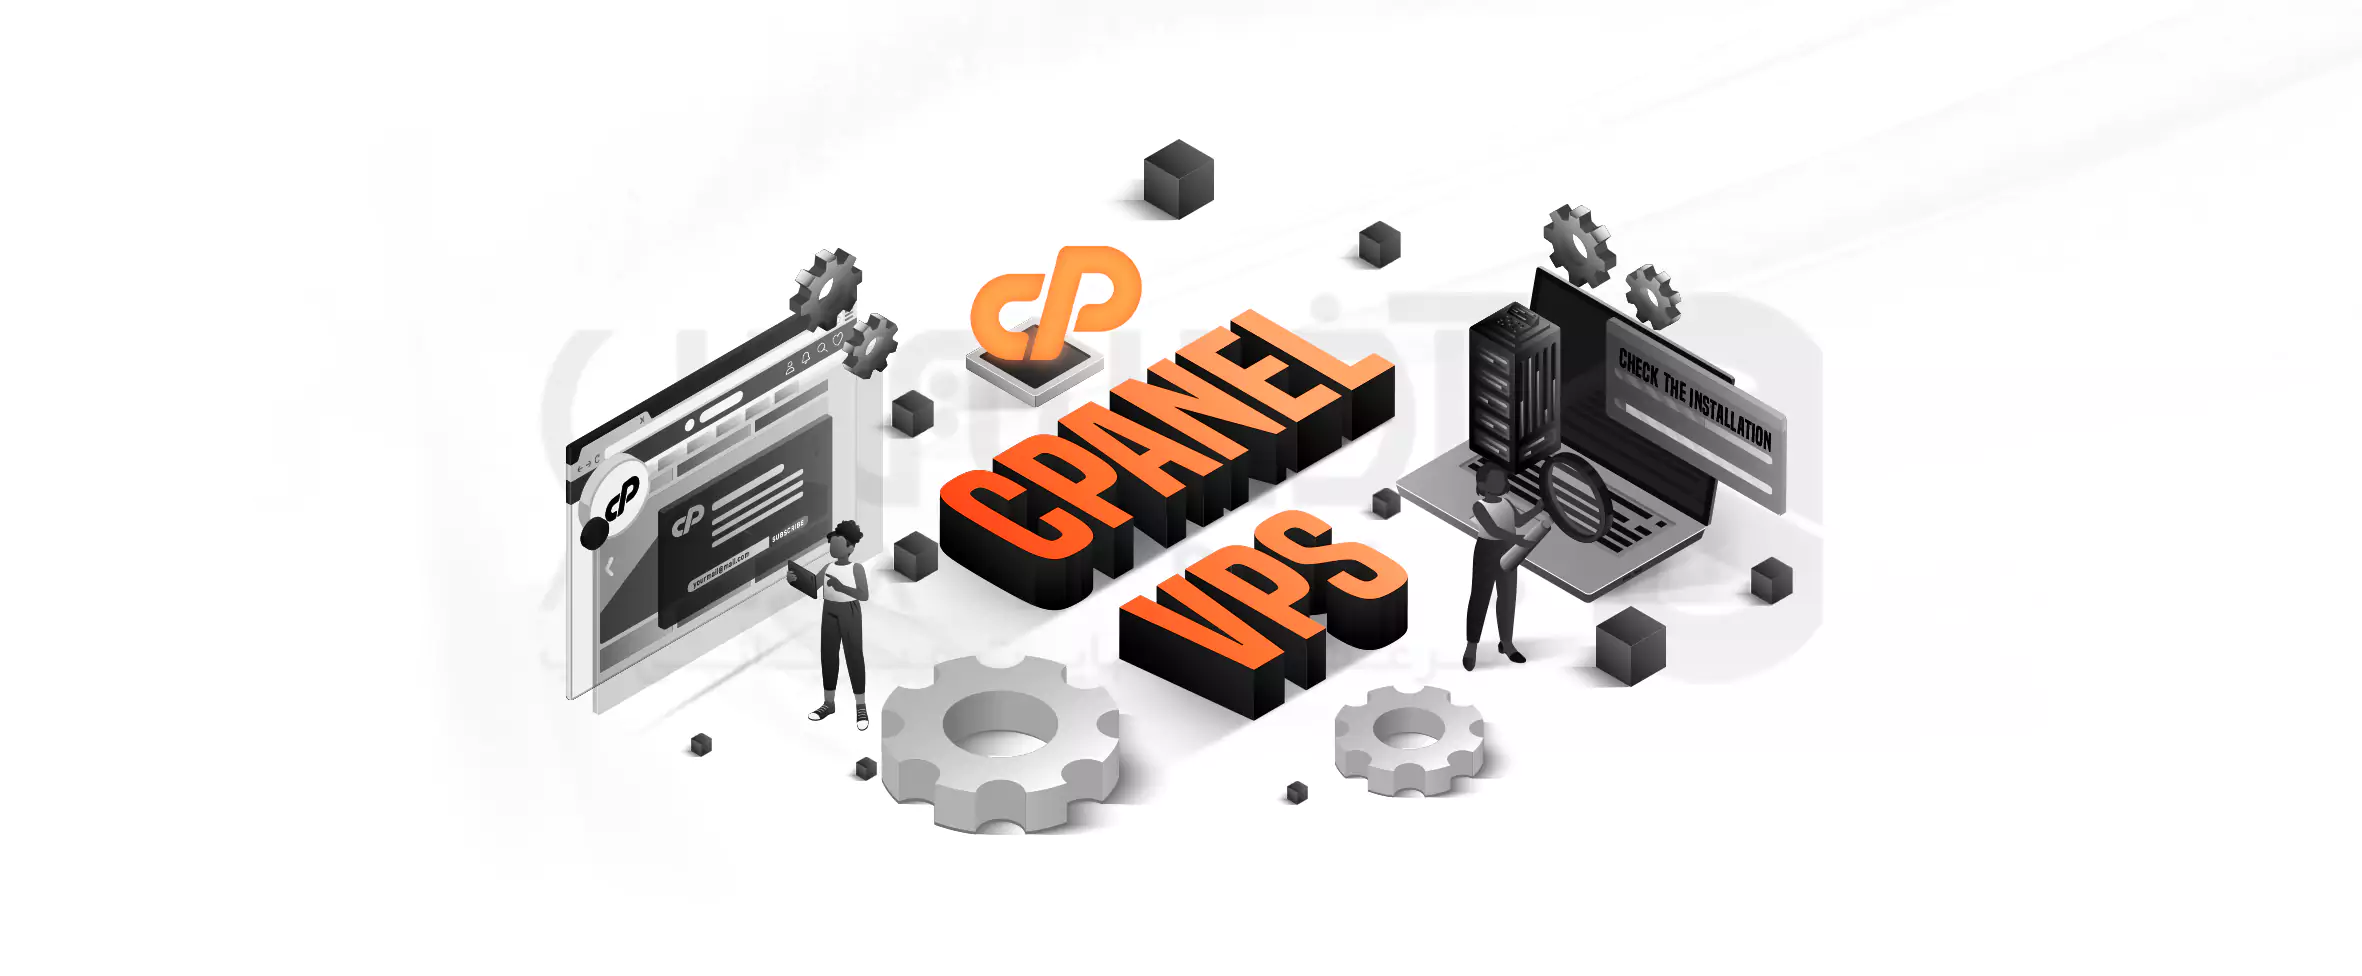 Checking how to install cPanel on a virtual server